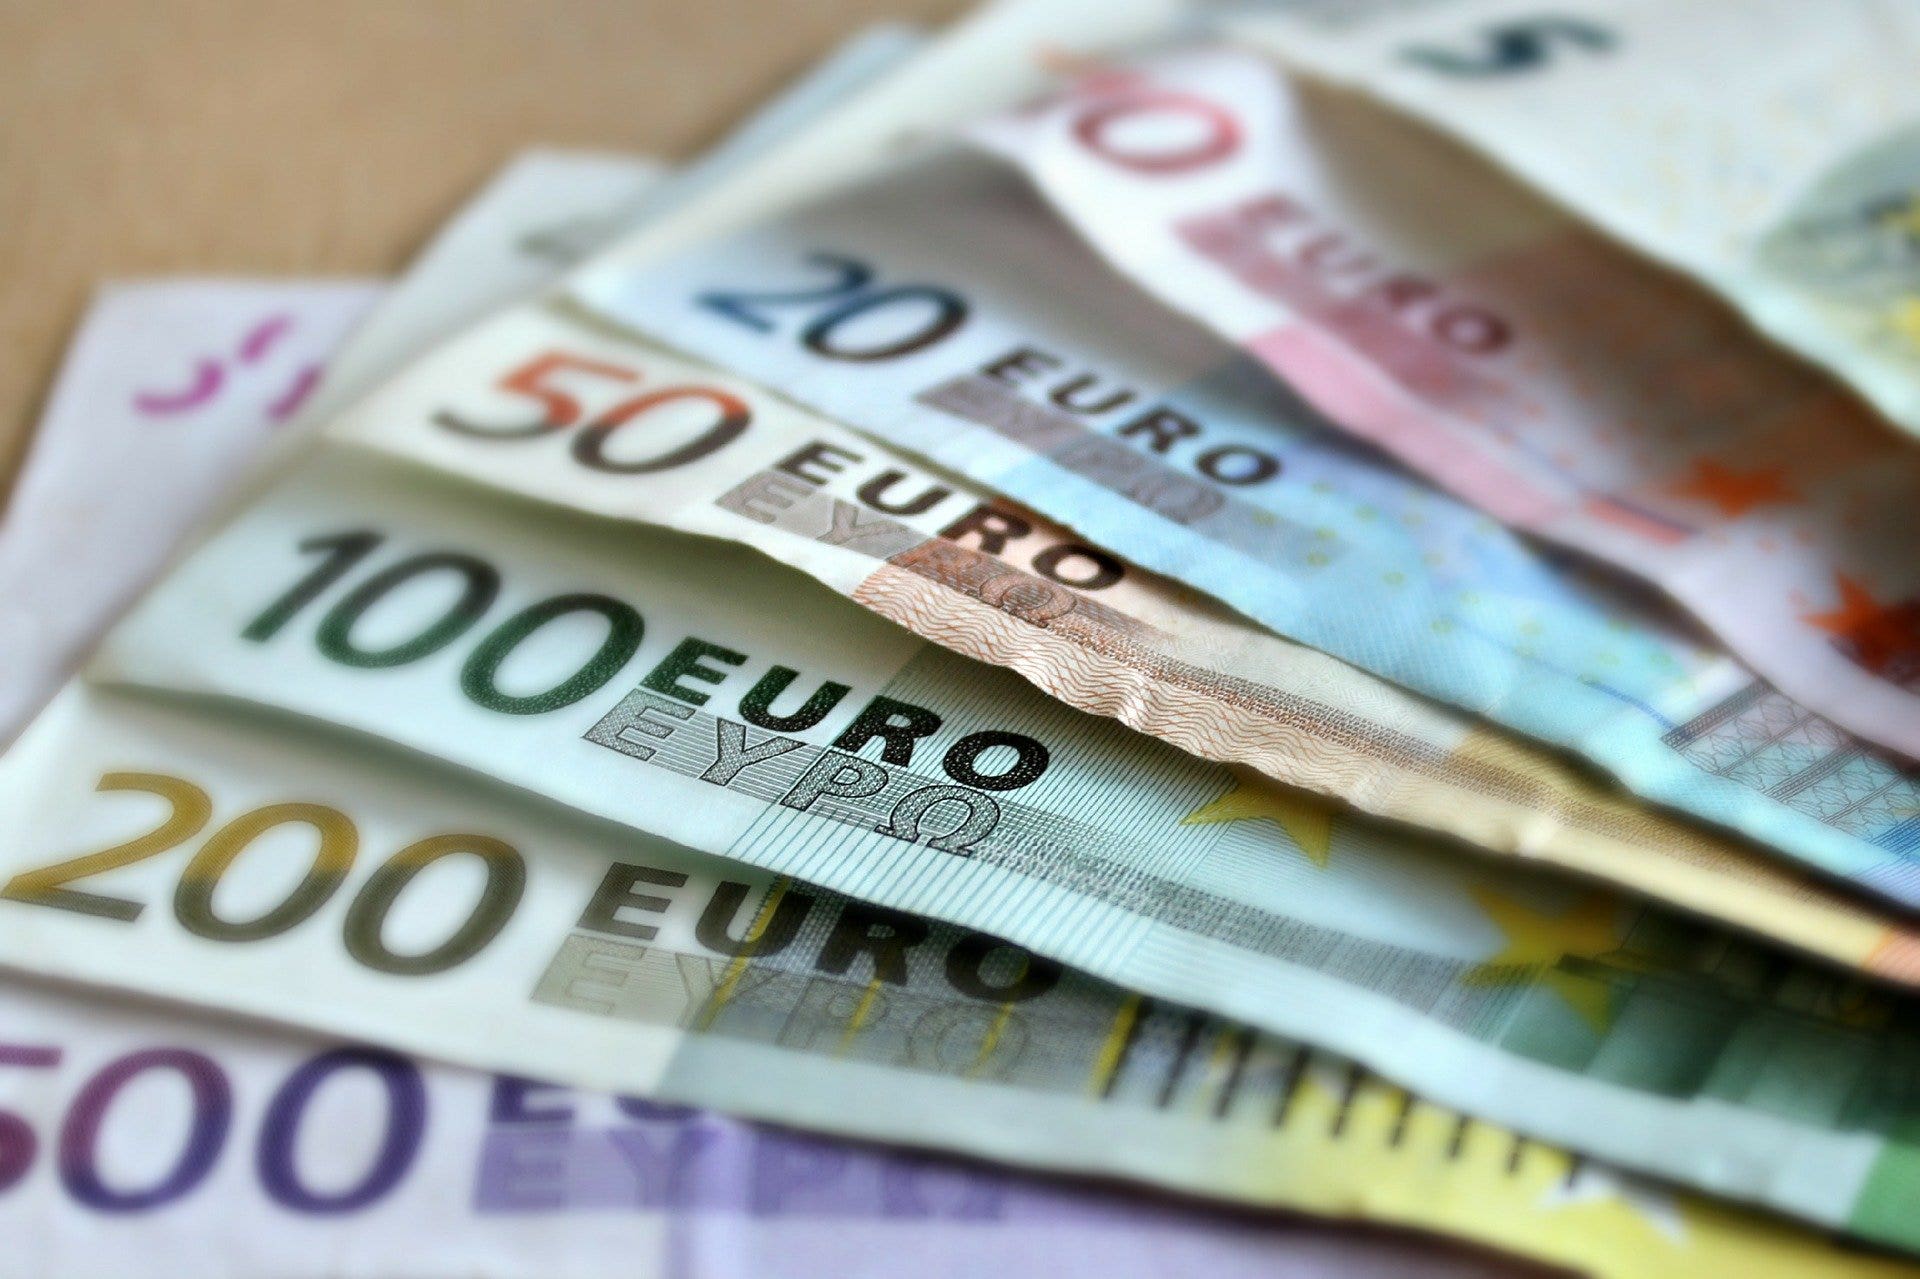 EUR/USD Forecast: Could Fall To 1.1885, The 61.8% Retracement Of The November/January Rally